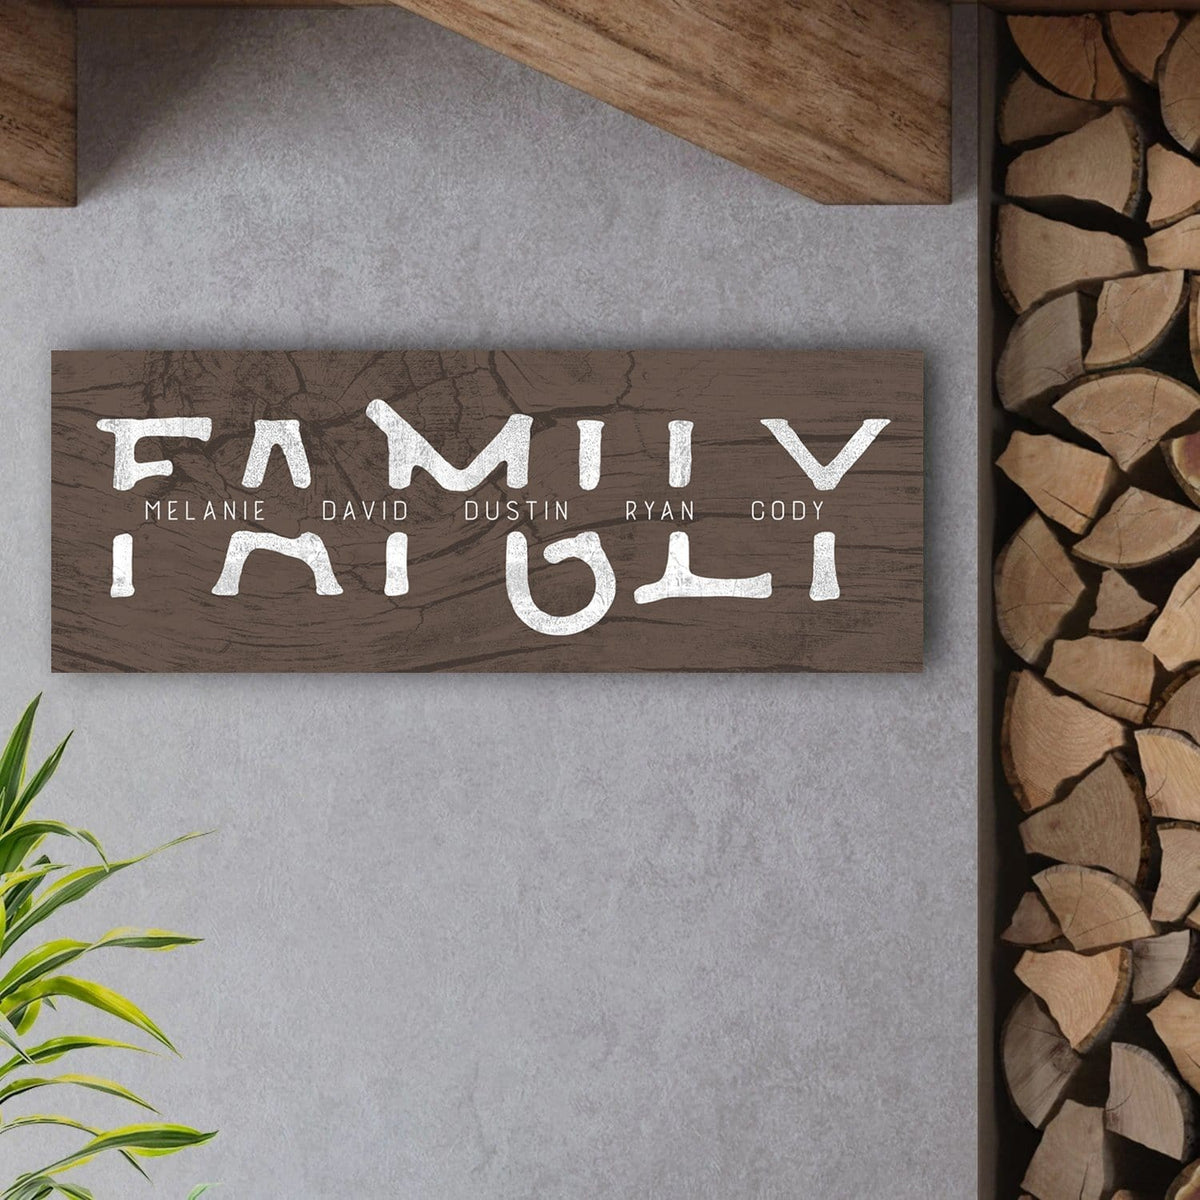 family name art rustic decor display from Personal Prints